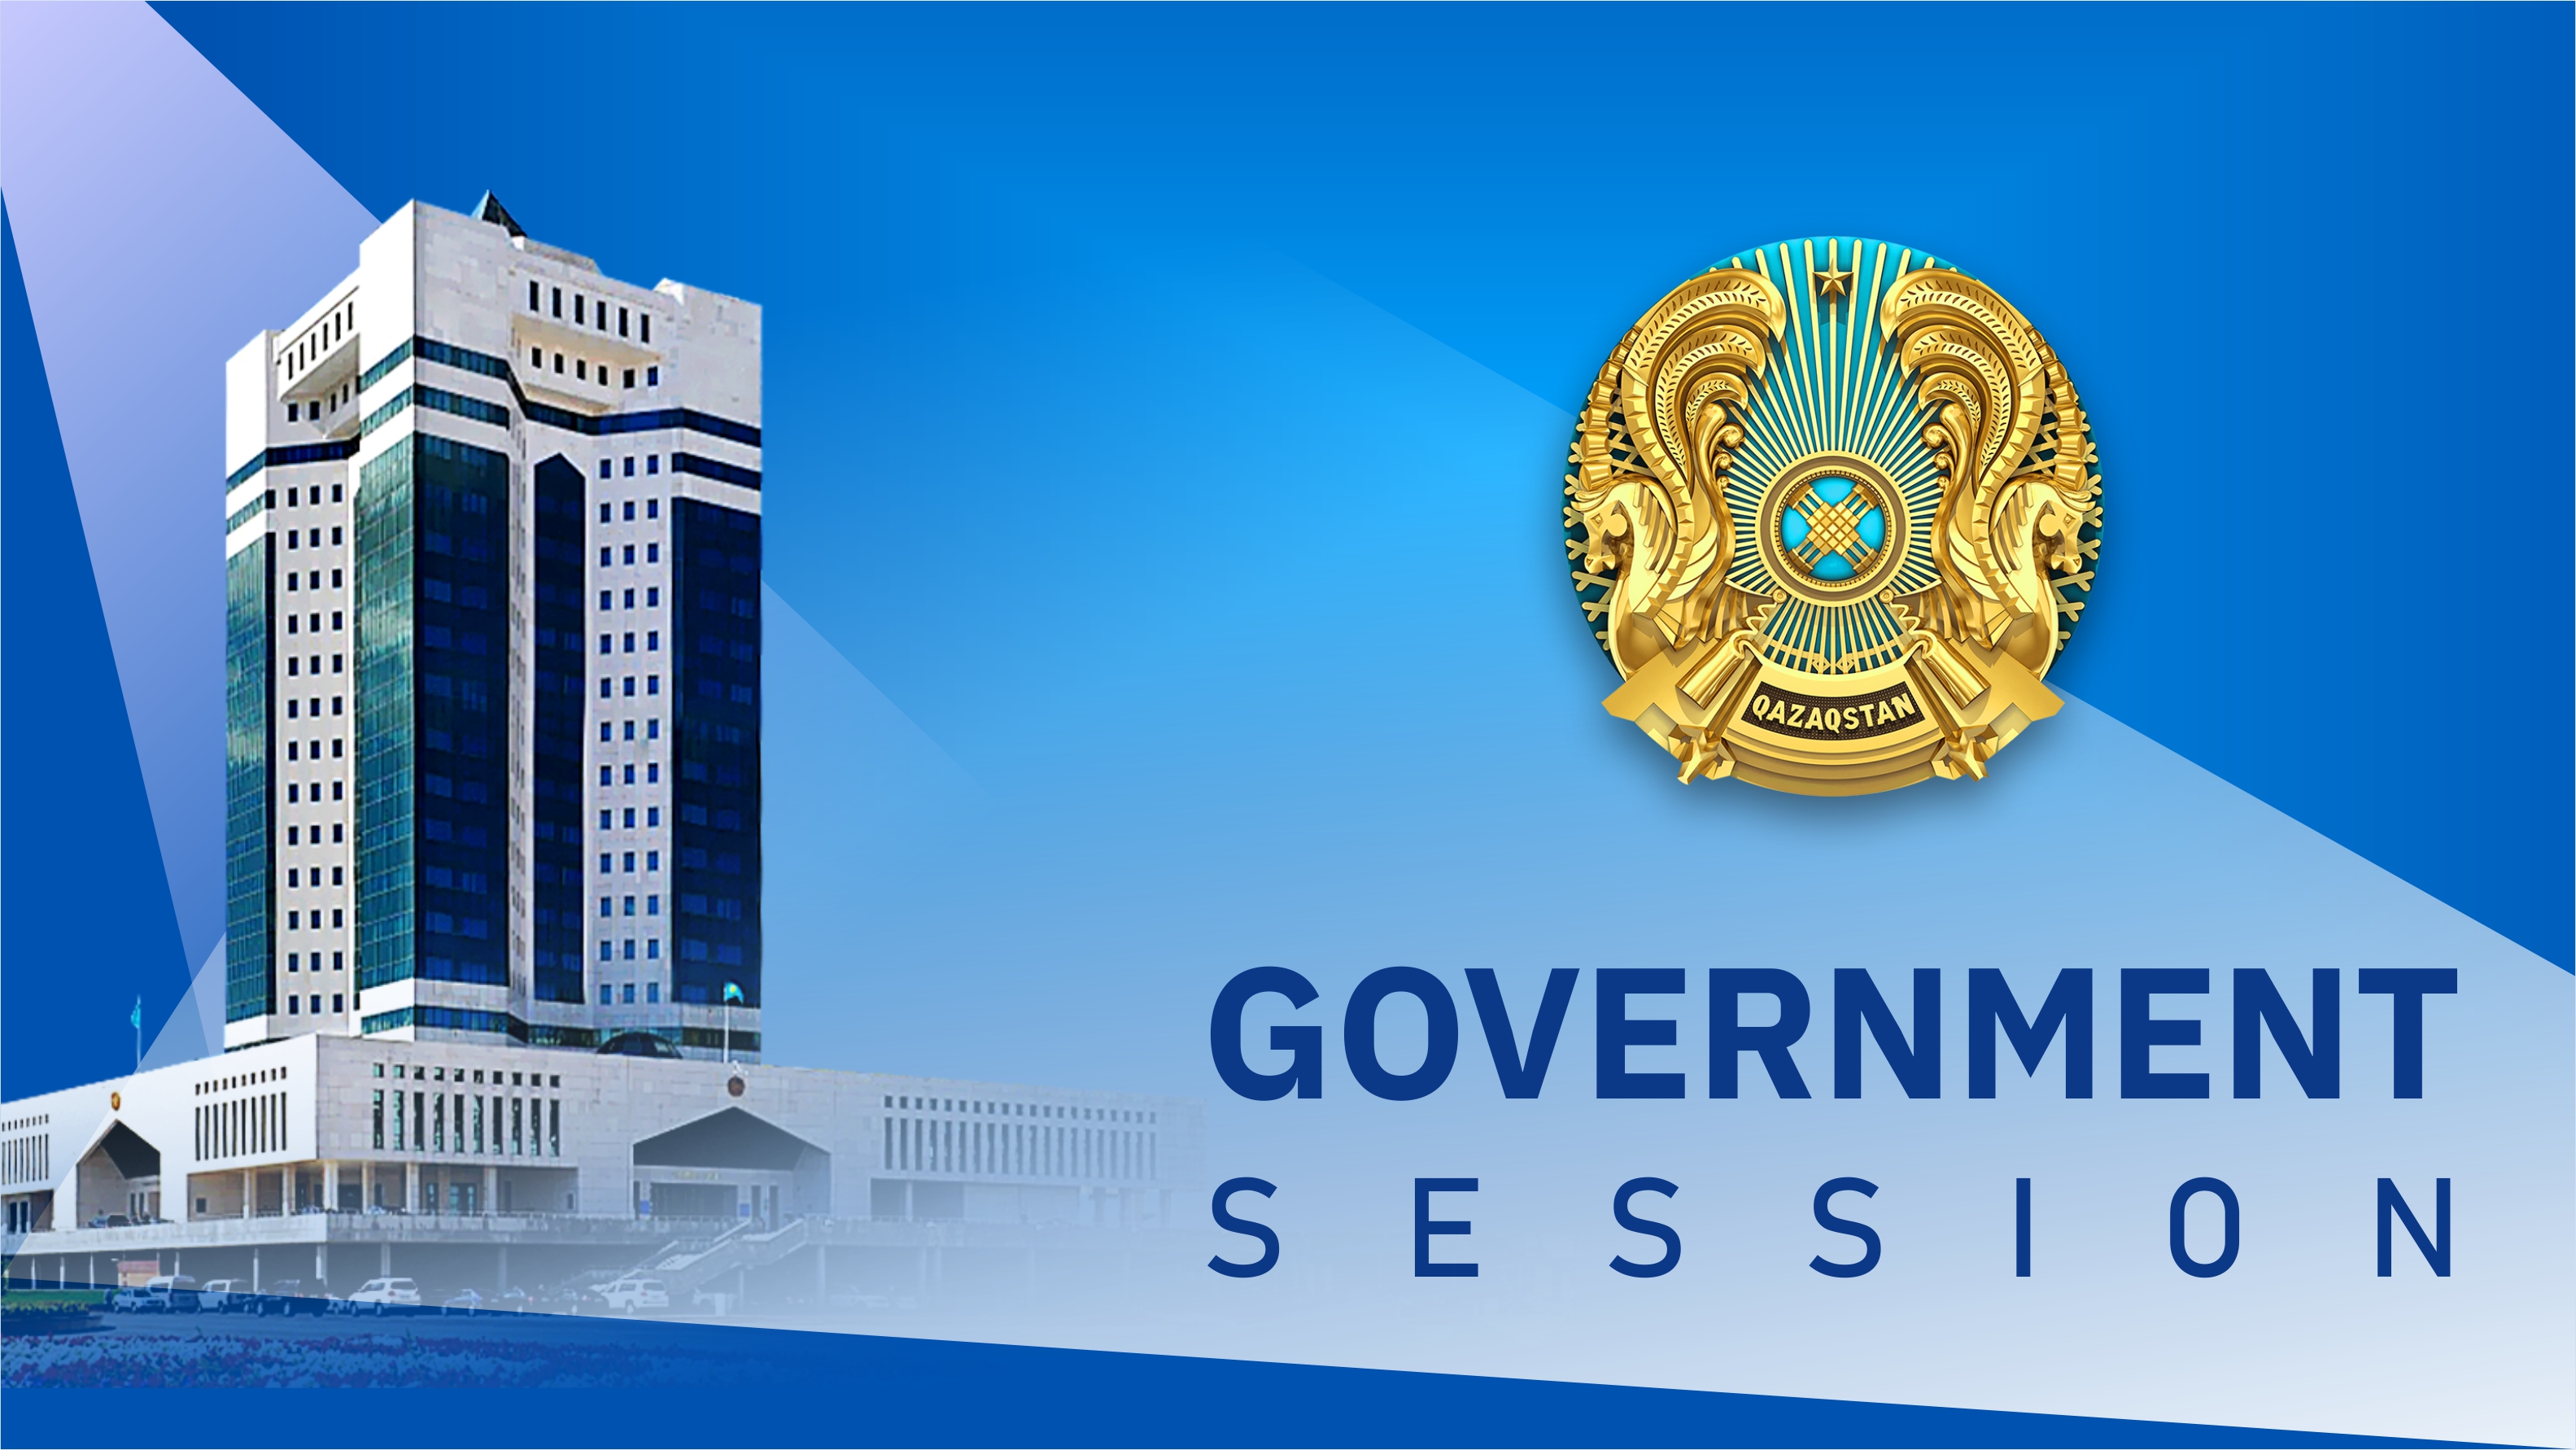 Government session is being held